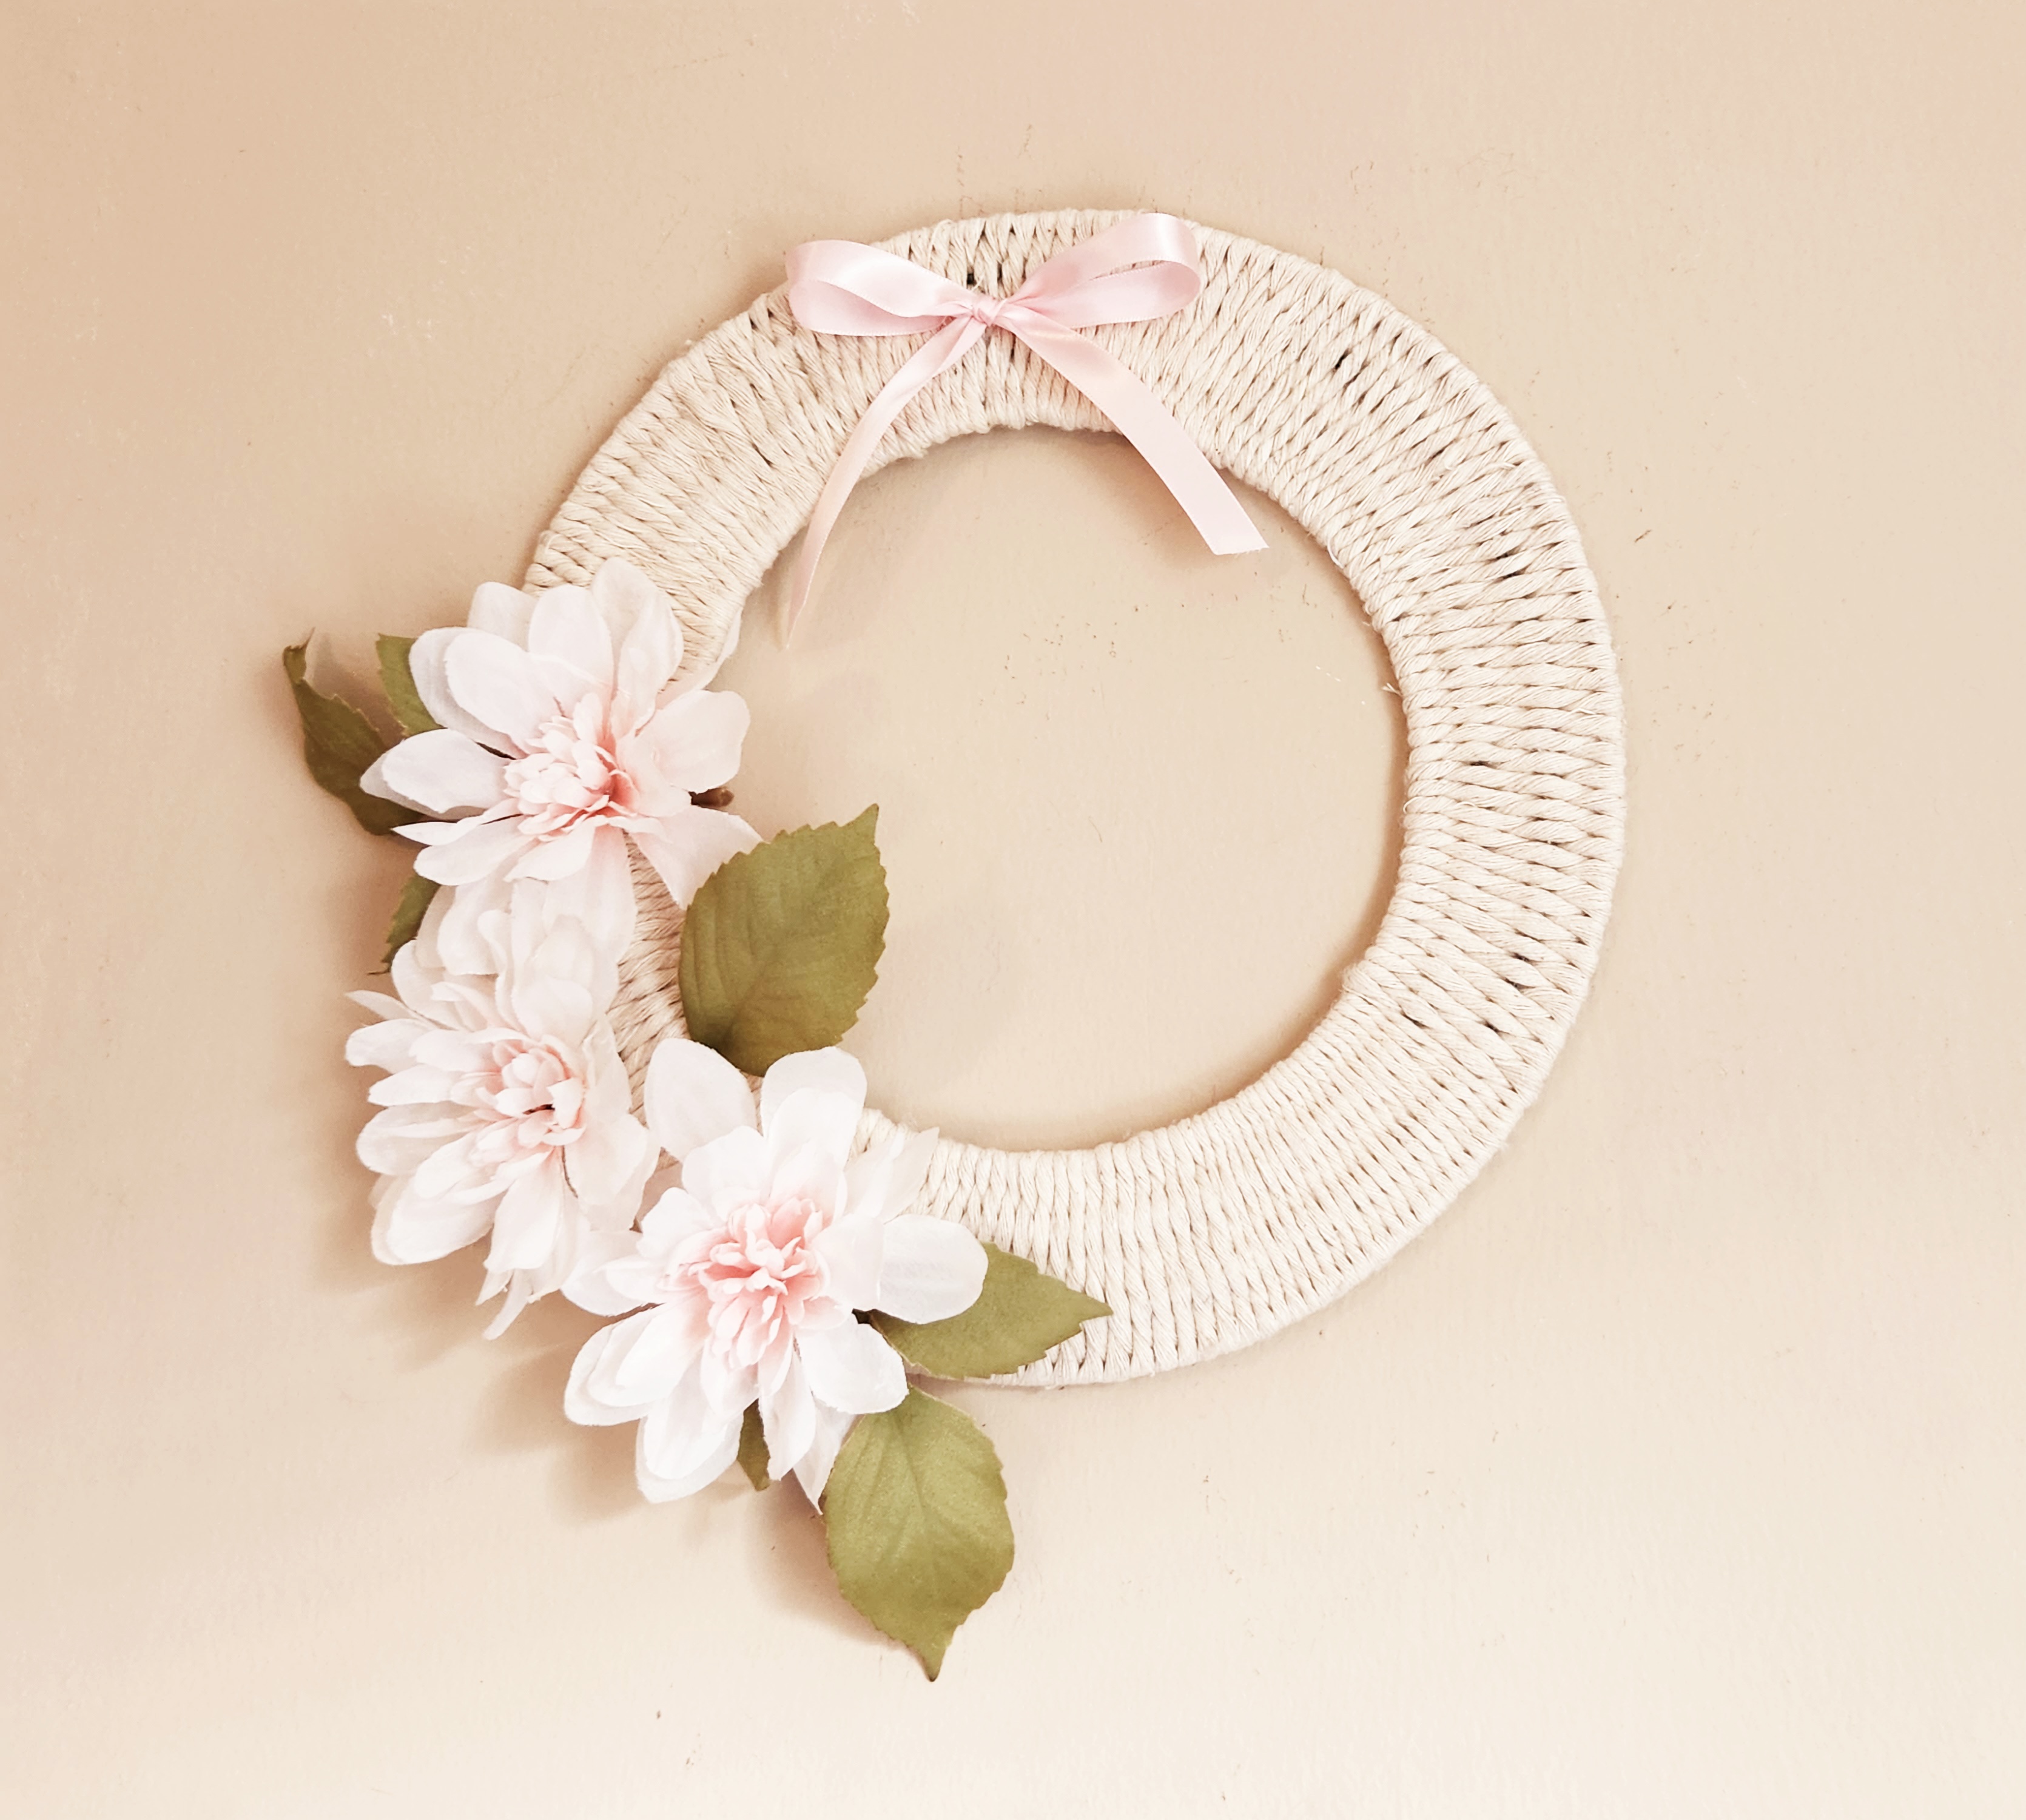 Woven rope wreath made with white cotton rope woven onto a wire wreath form with pink dahlias across the lower left side and a pink satin ribbon on the top.